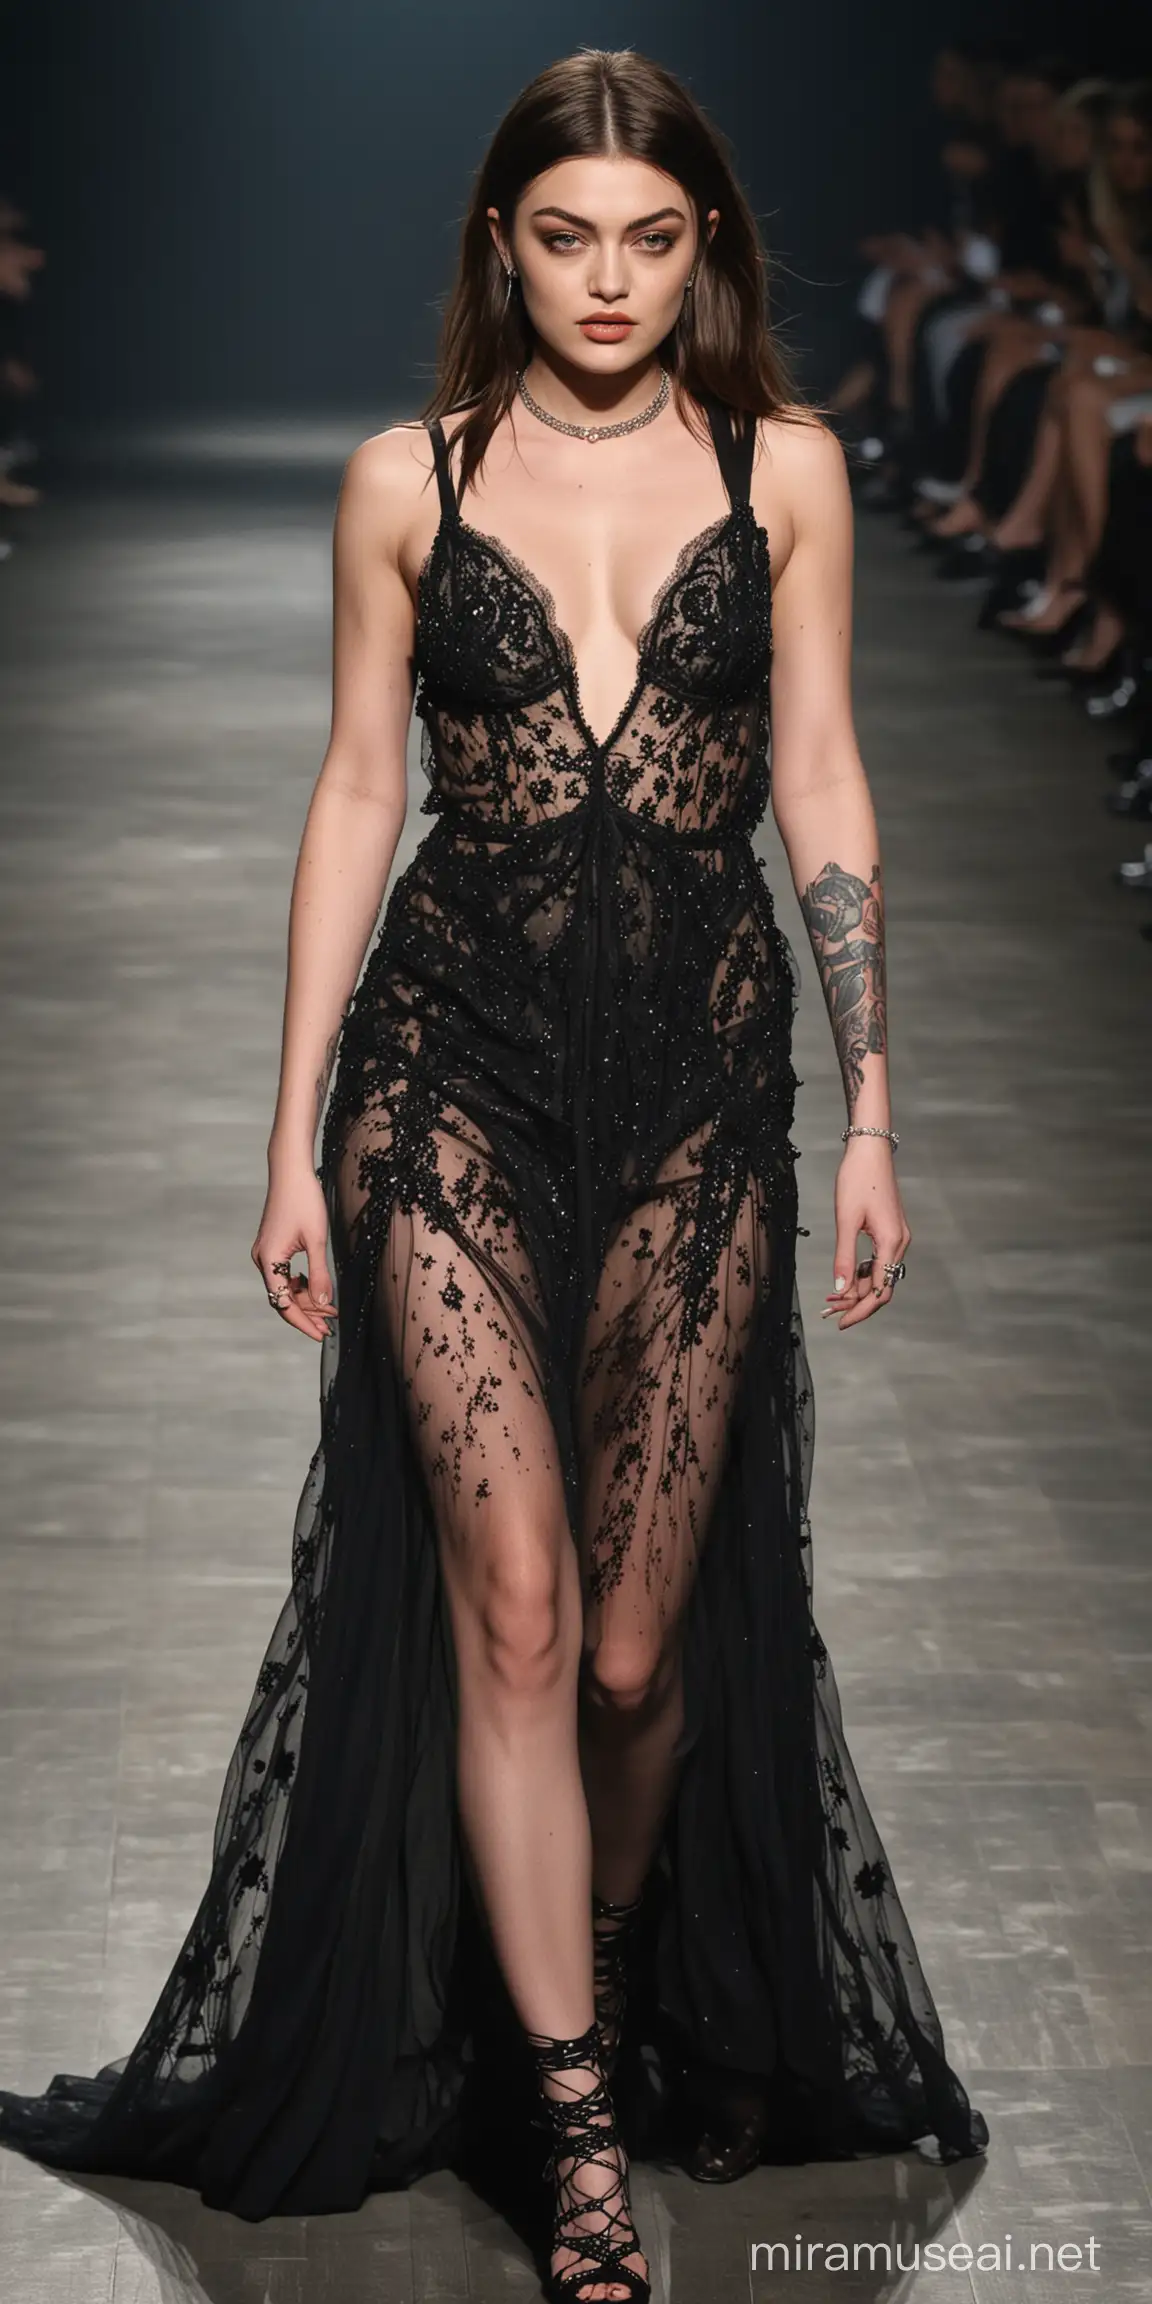 Elegant Runway Model Combining Gigi Hadid and Frances Bean Cobain Features in a Dark Hairstyle